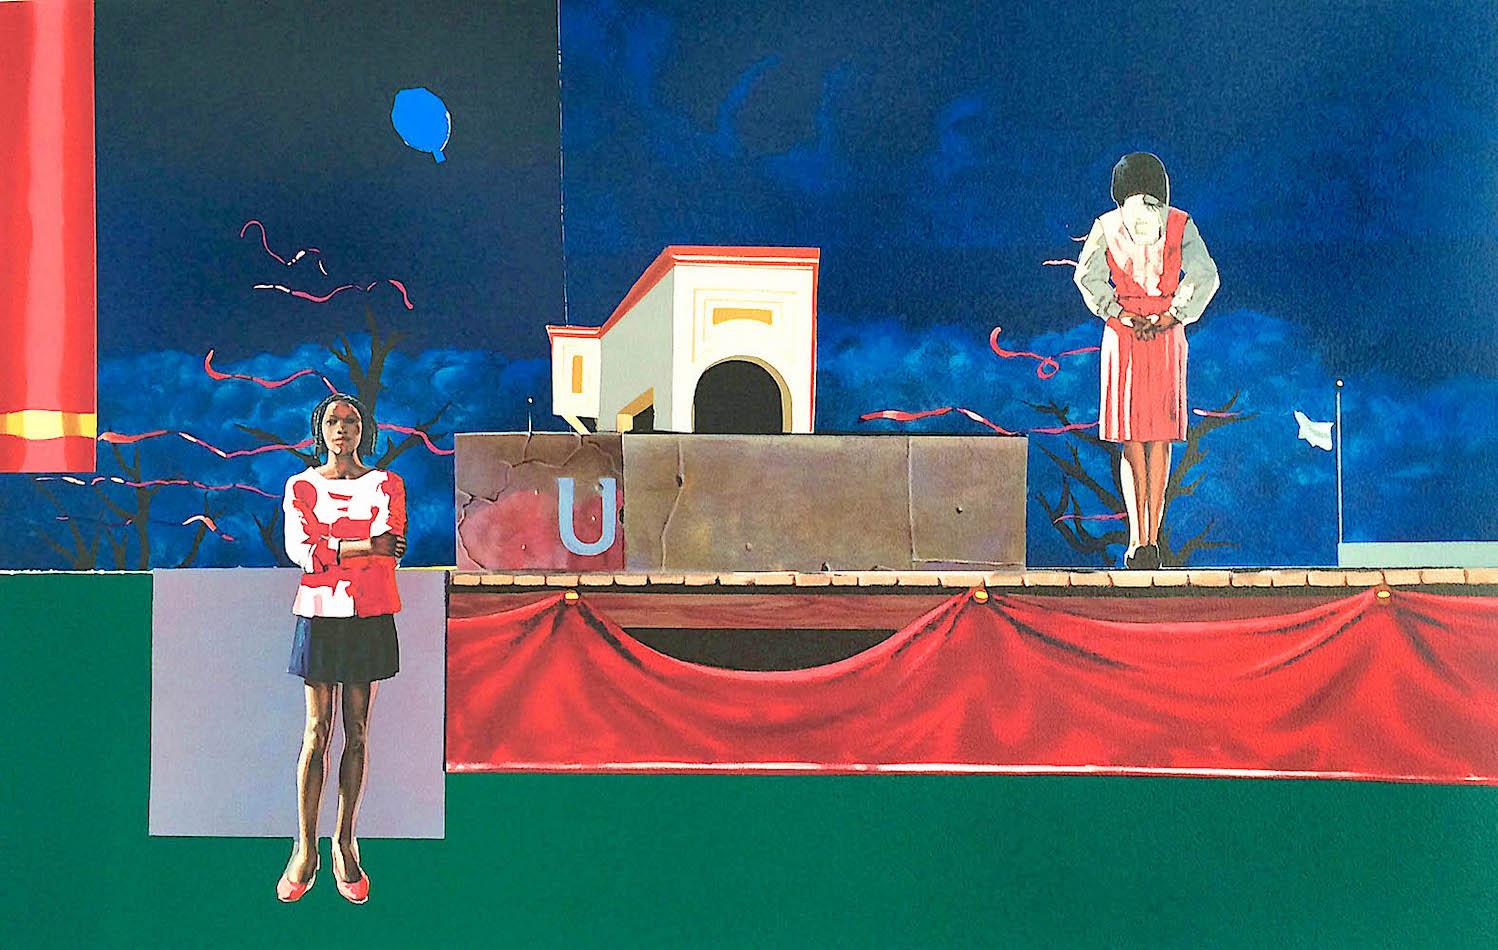 NOCTURNE Signed Lithograph, Black Women Theater Stage Night Sky Balloon Ribbons